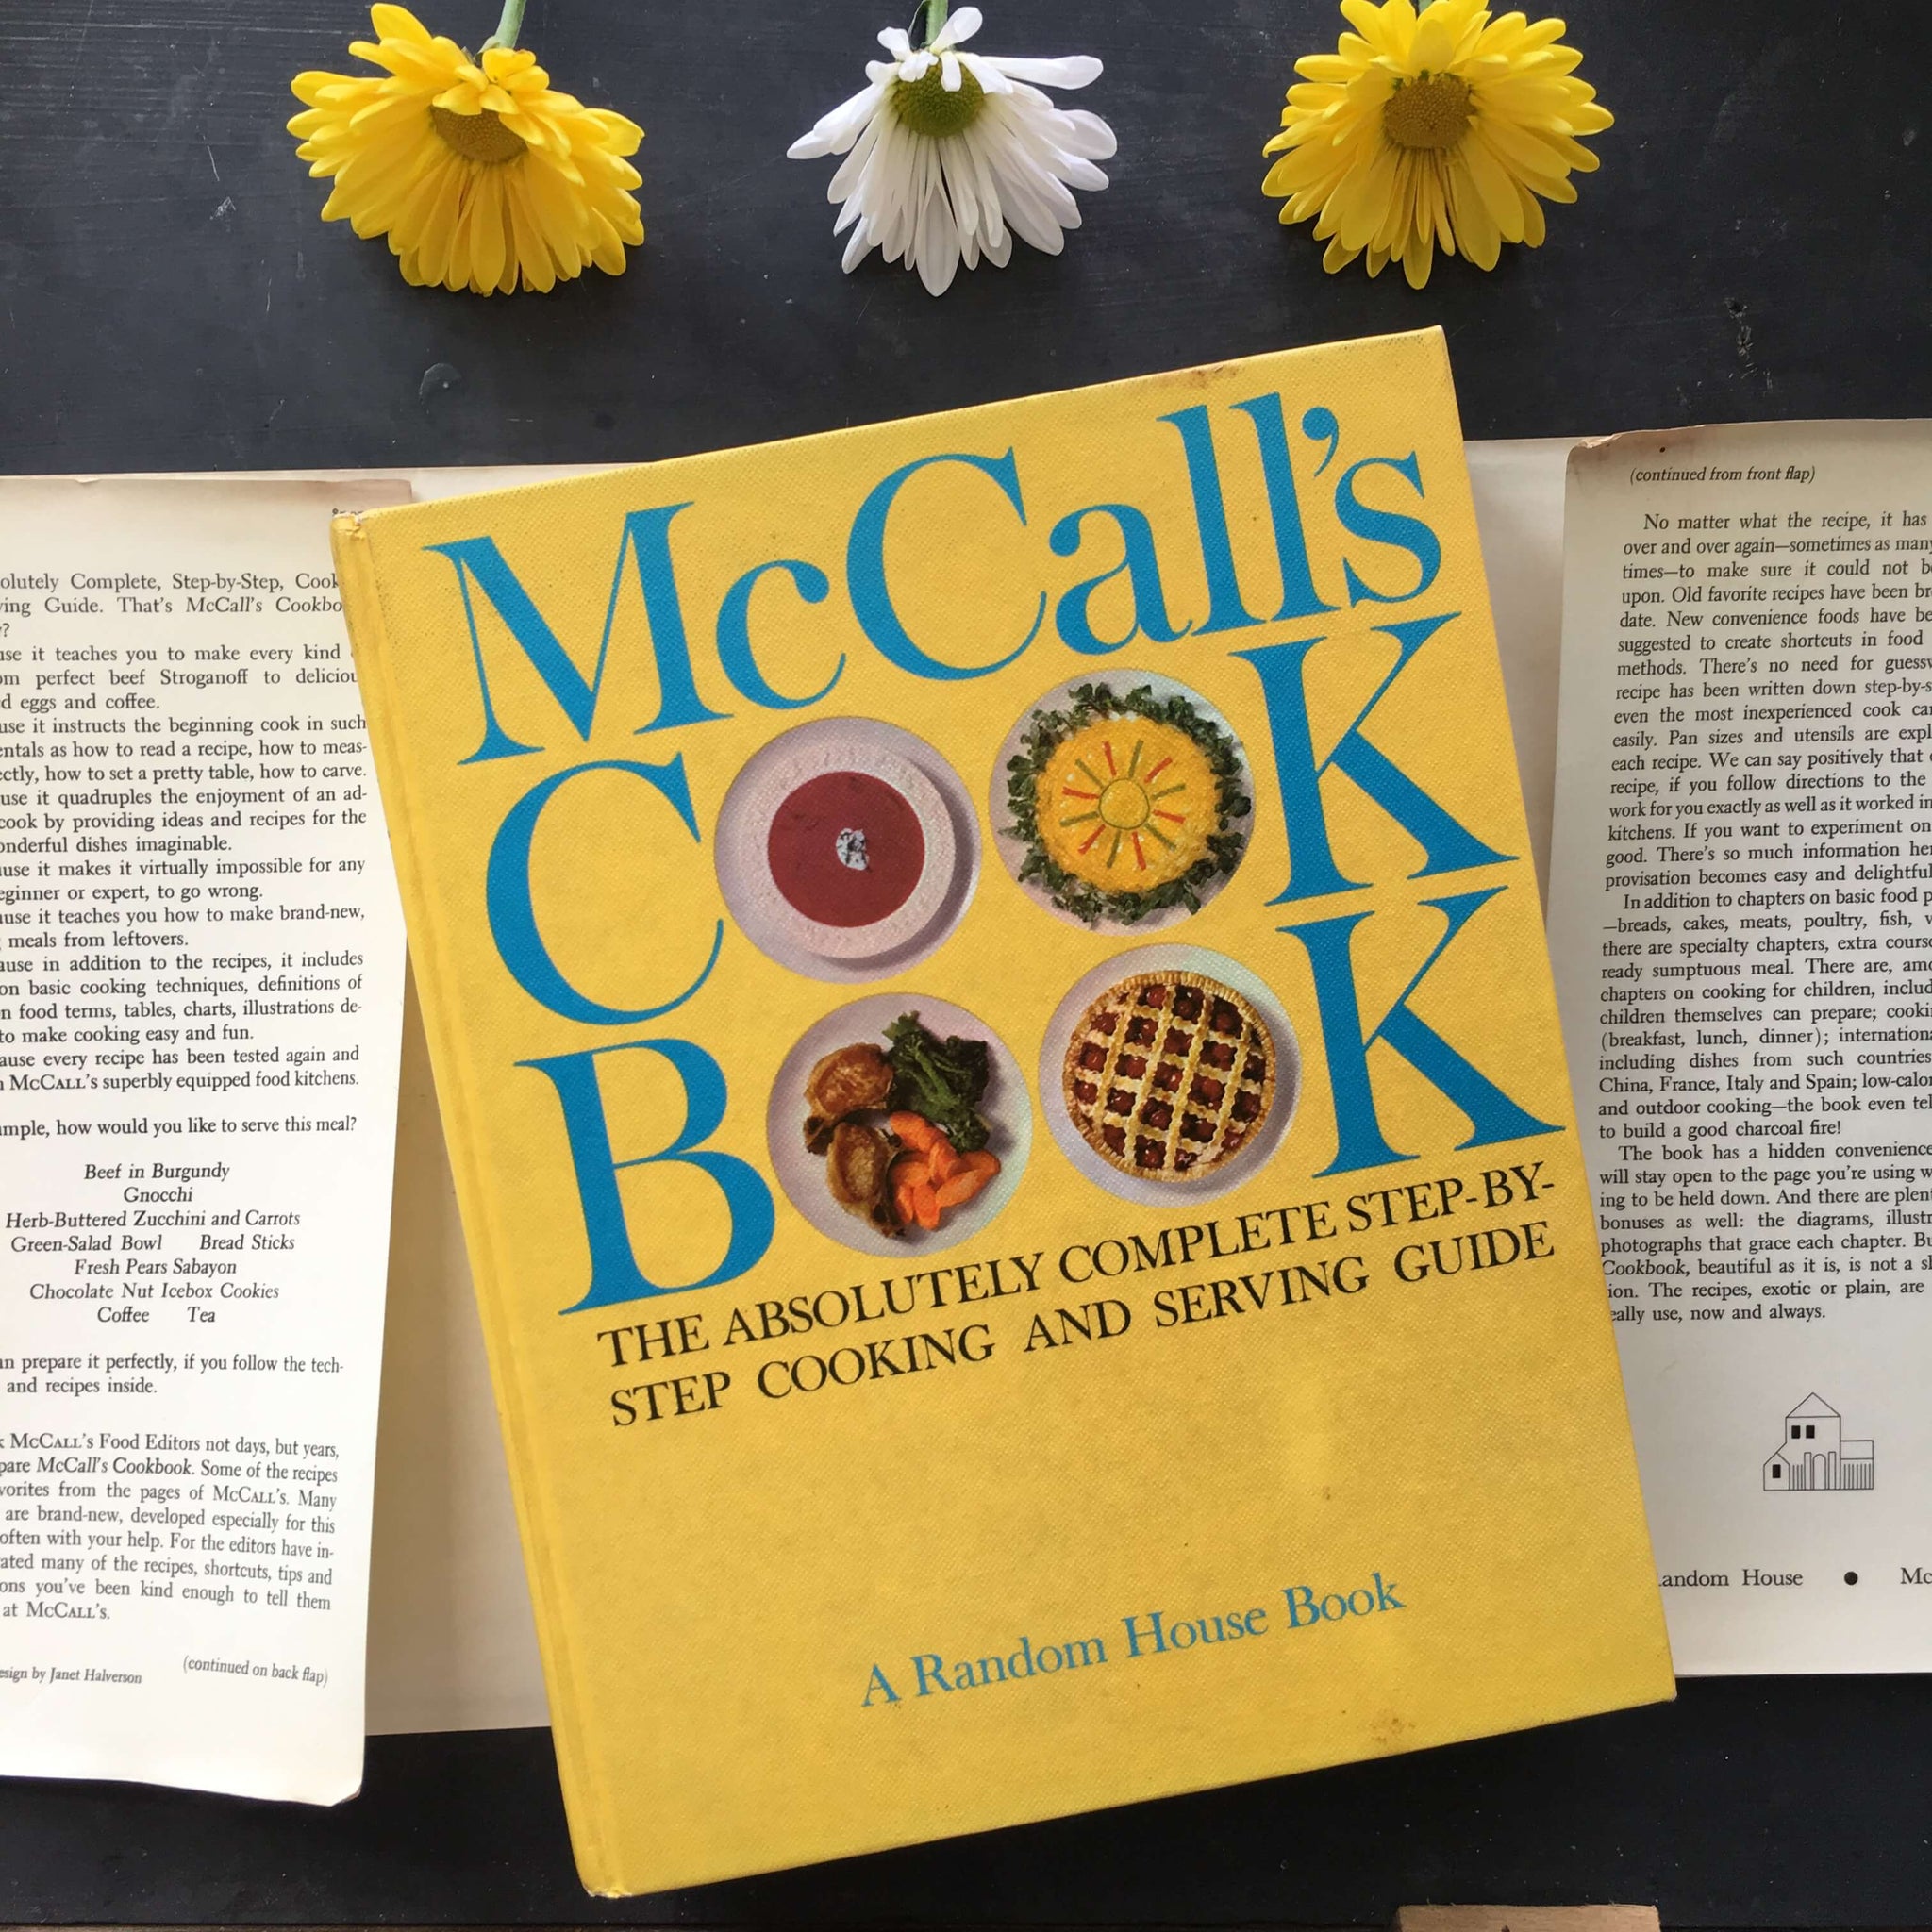 McCall's Cook Book - 1963 - Rare Yellow Edition - 8th Printing with Dust Jacket